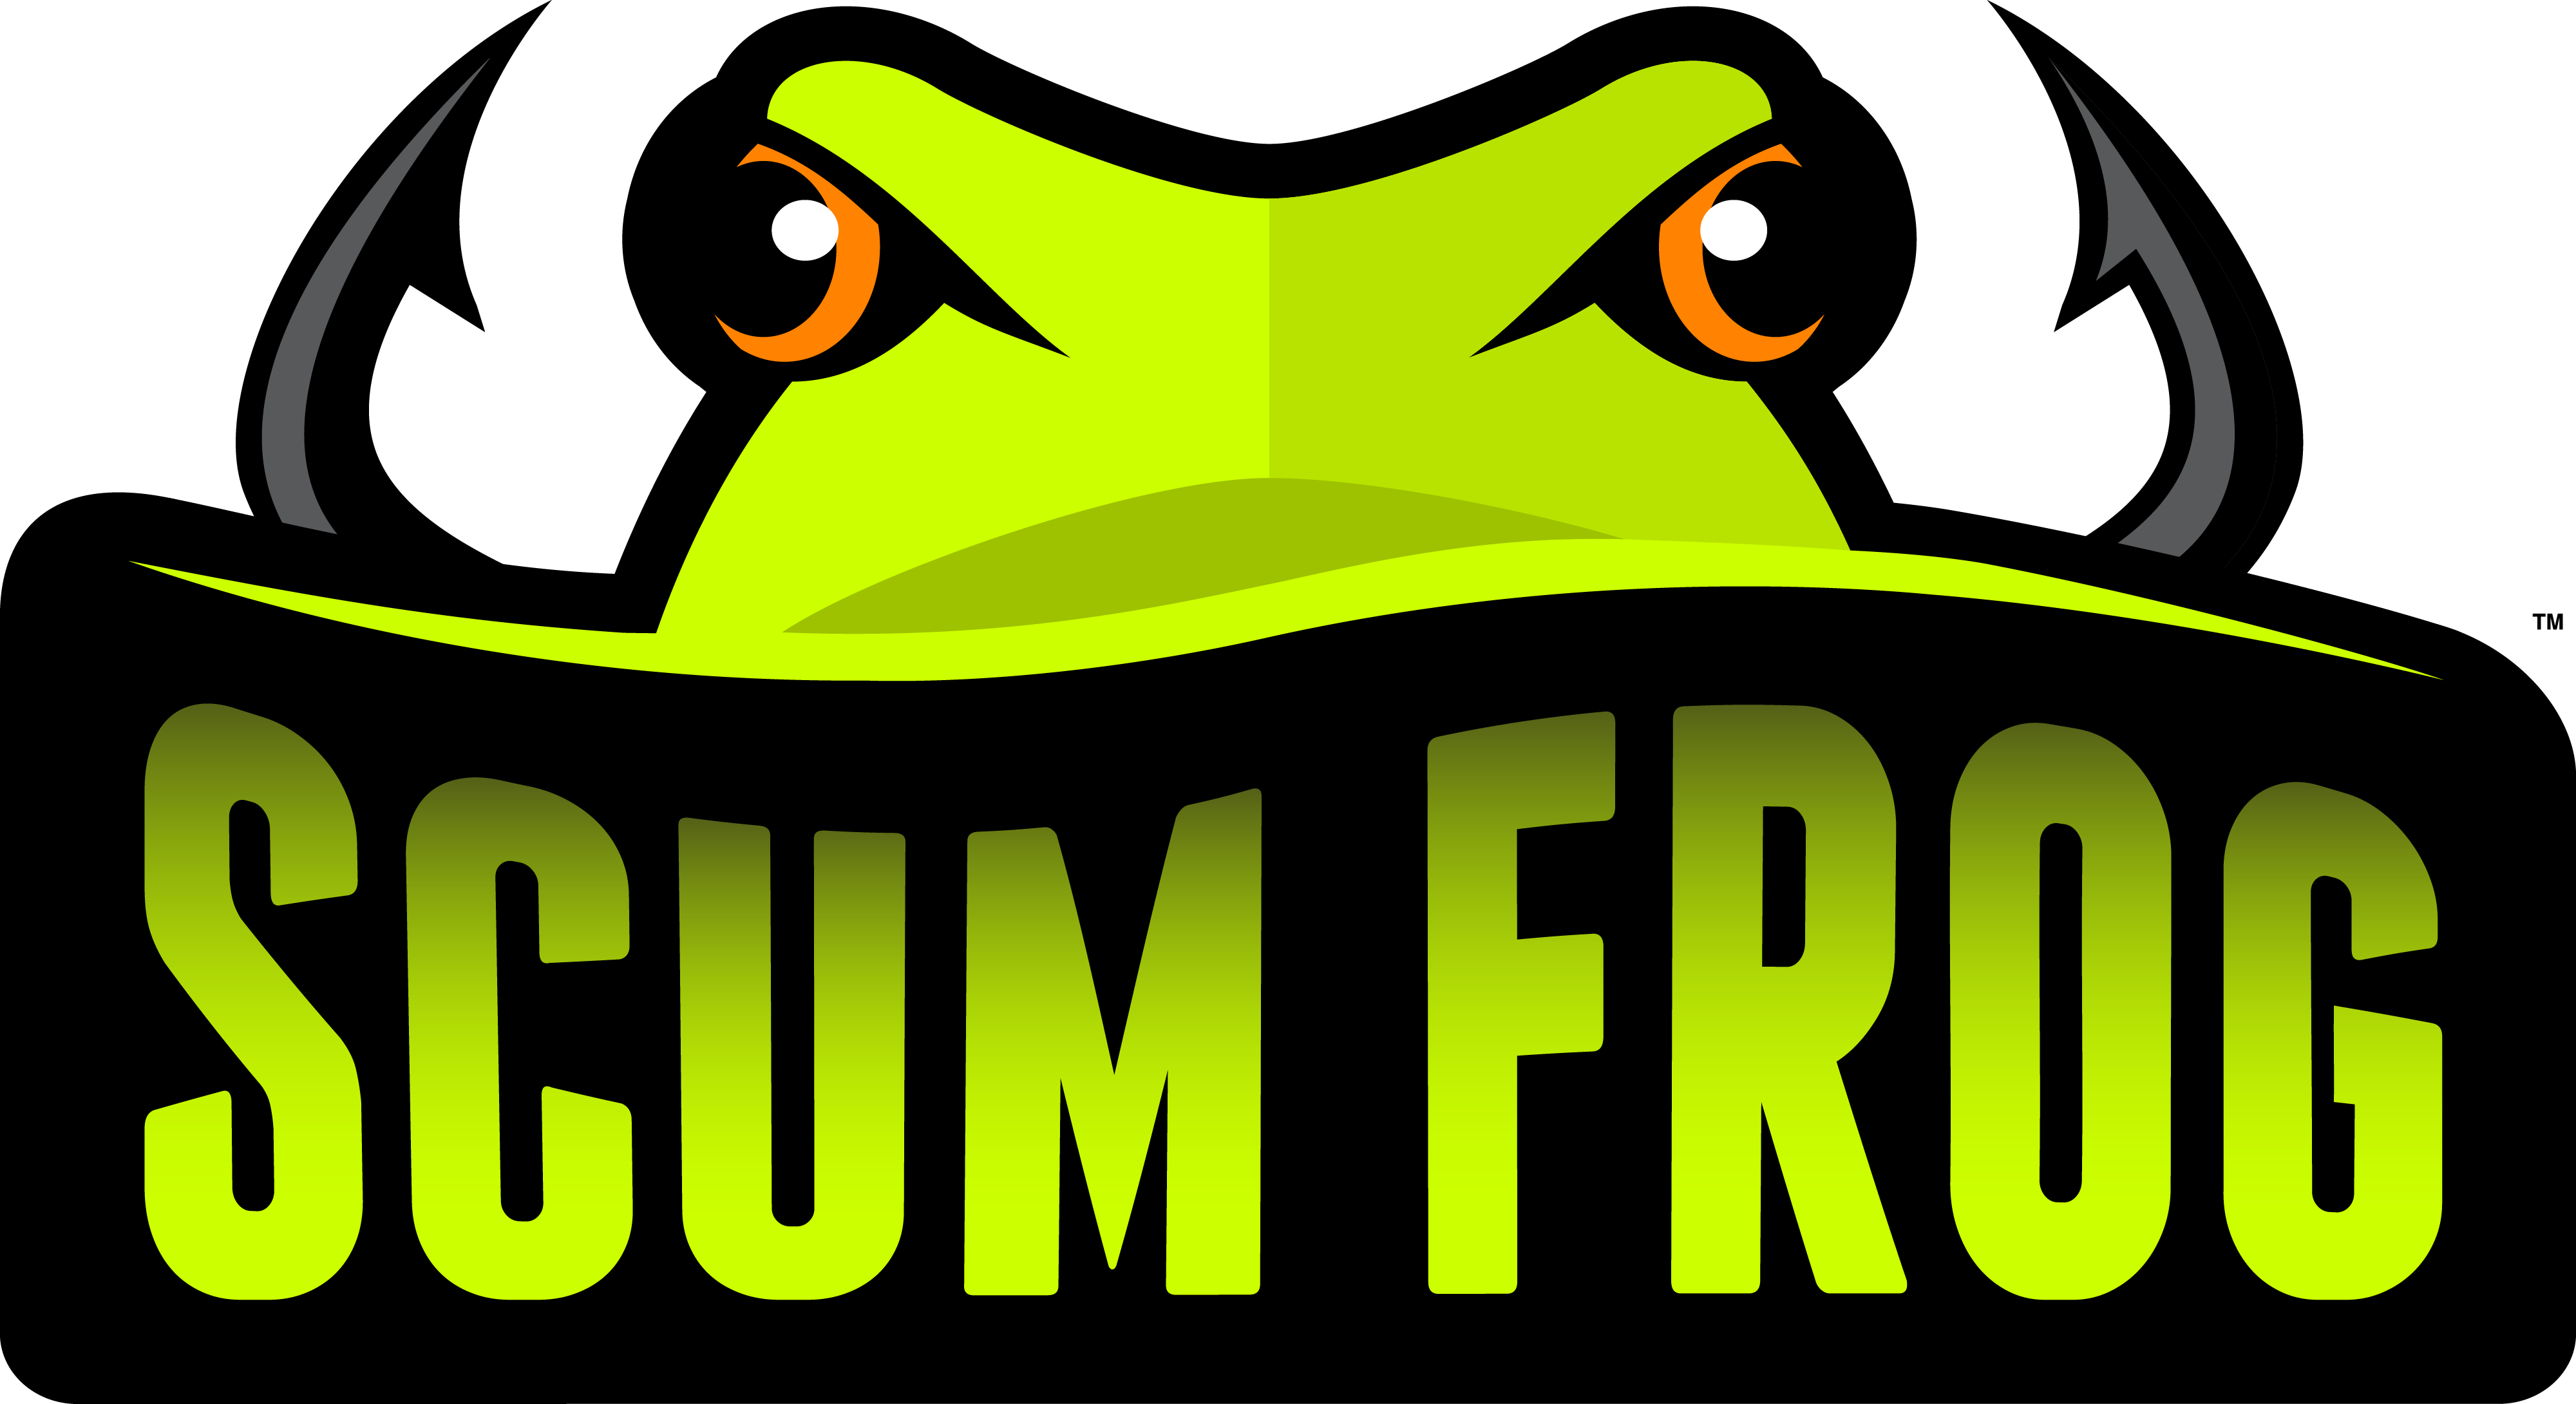 All New Realistic Scum Frog Painted Trophy Series Meets Angler Demands